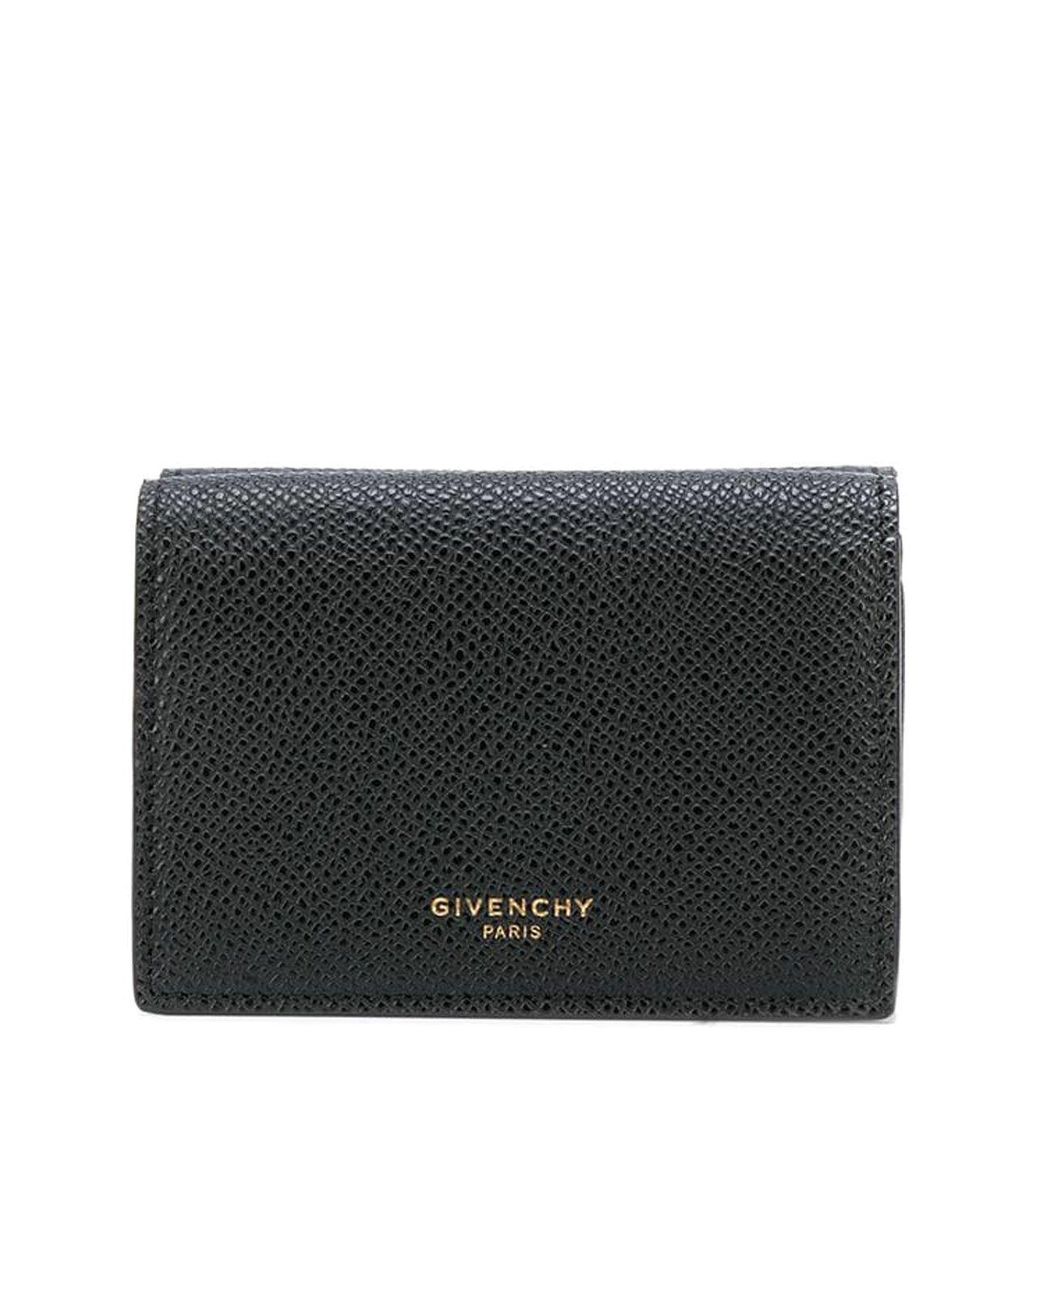 Givenchy Leather Wallet in Black for Men - Lyst